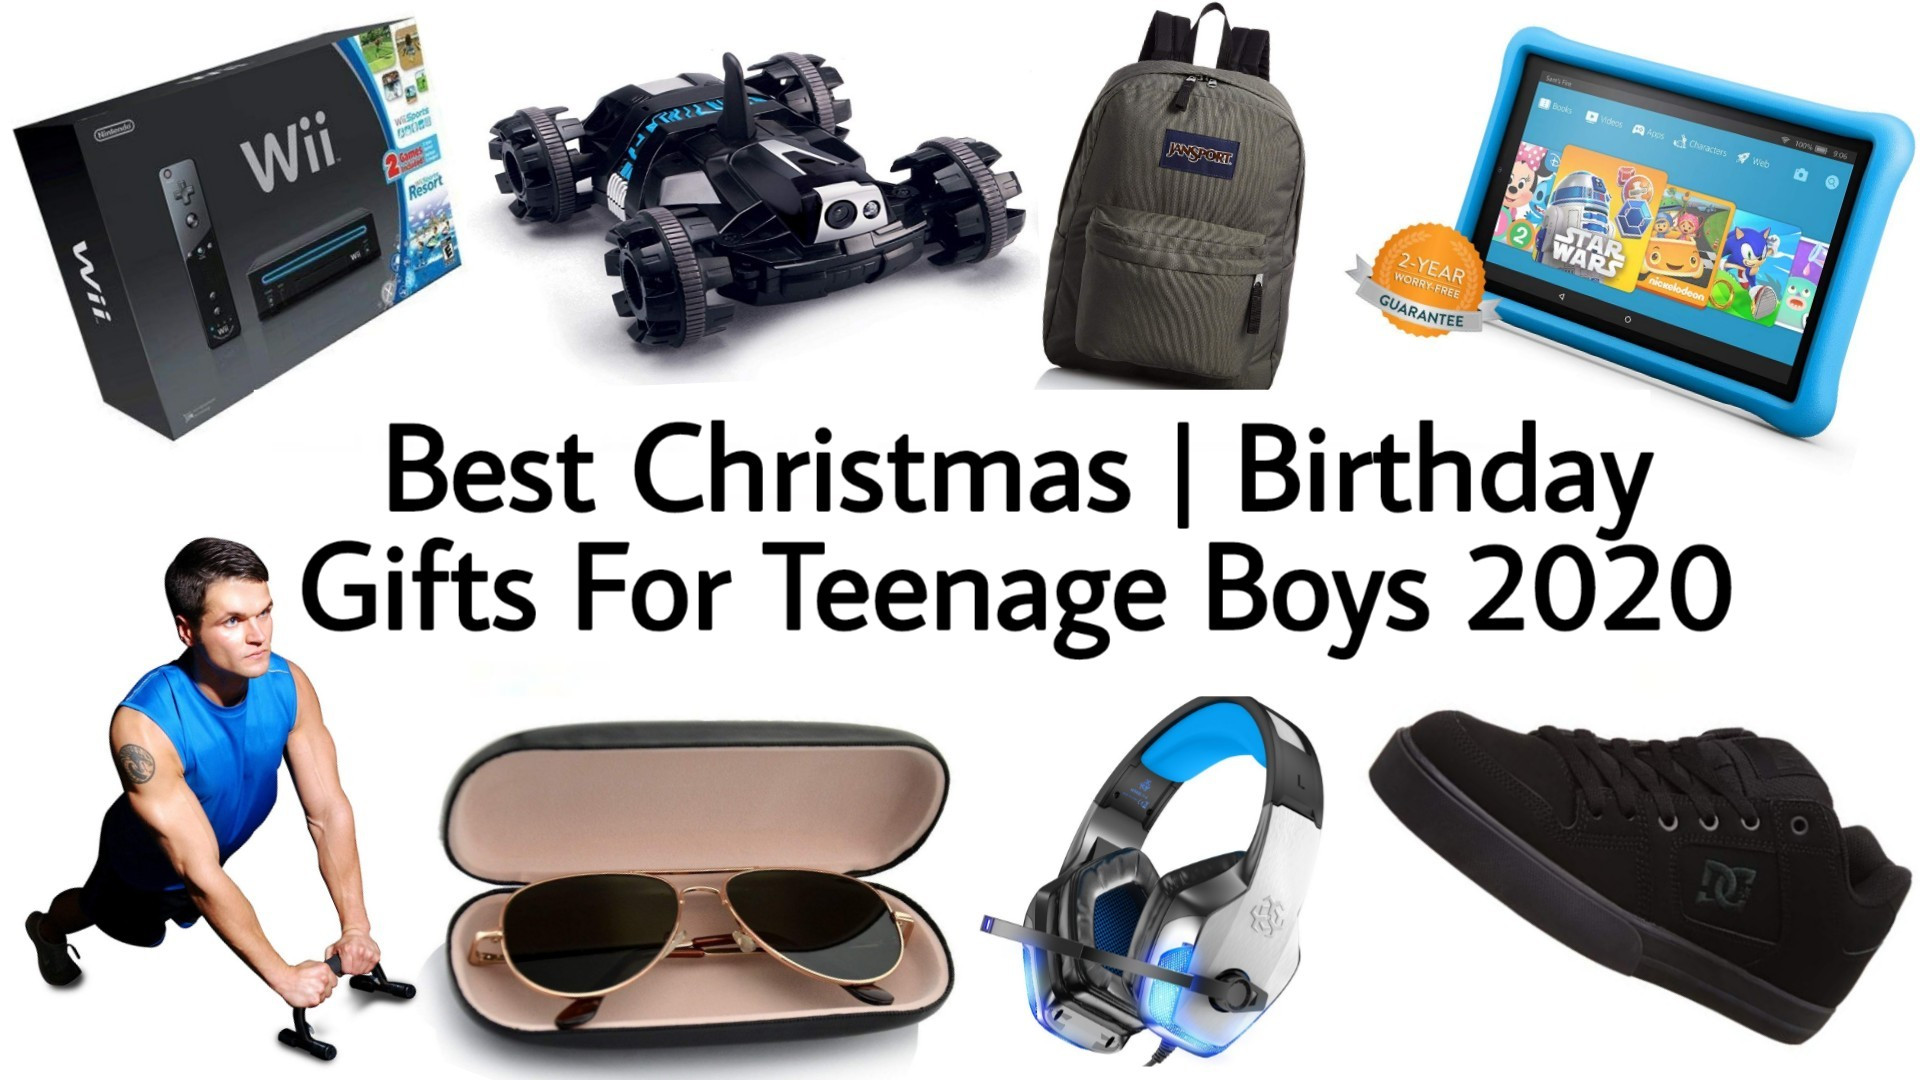 Top Holiday Gift Ideas 2020
 Best Christmas Gifts for Teenage Boys 2020